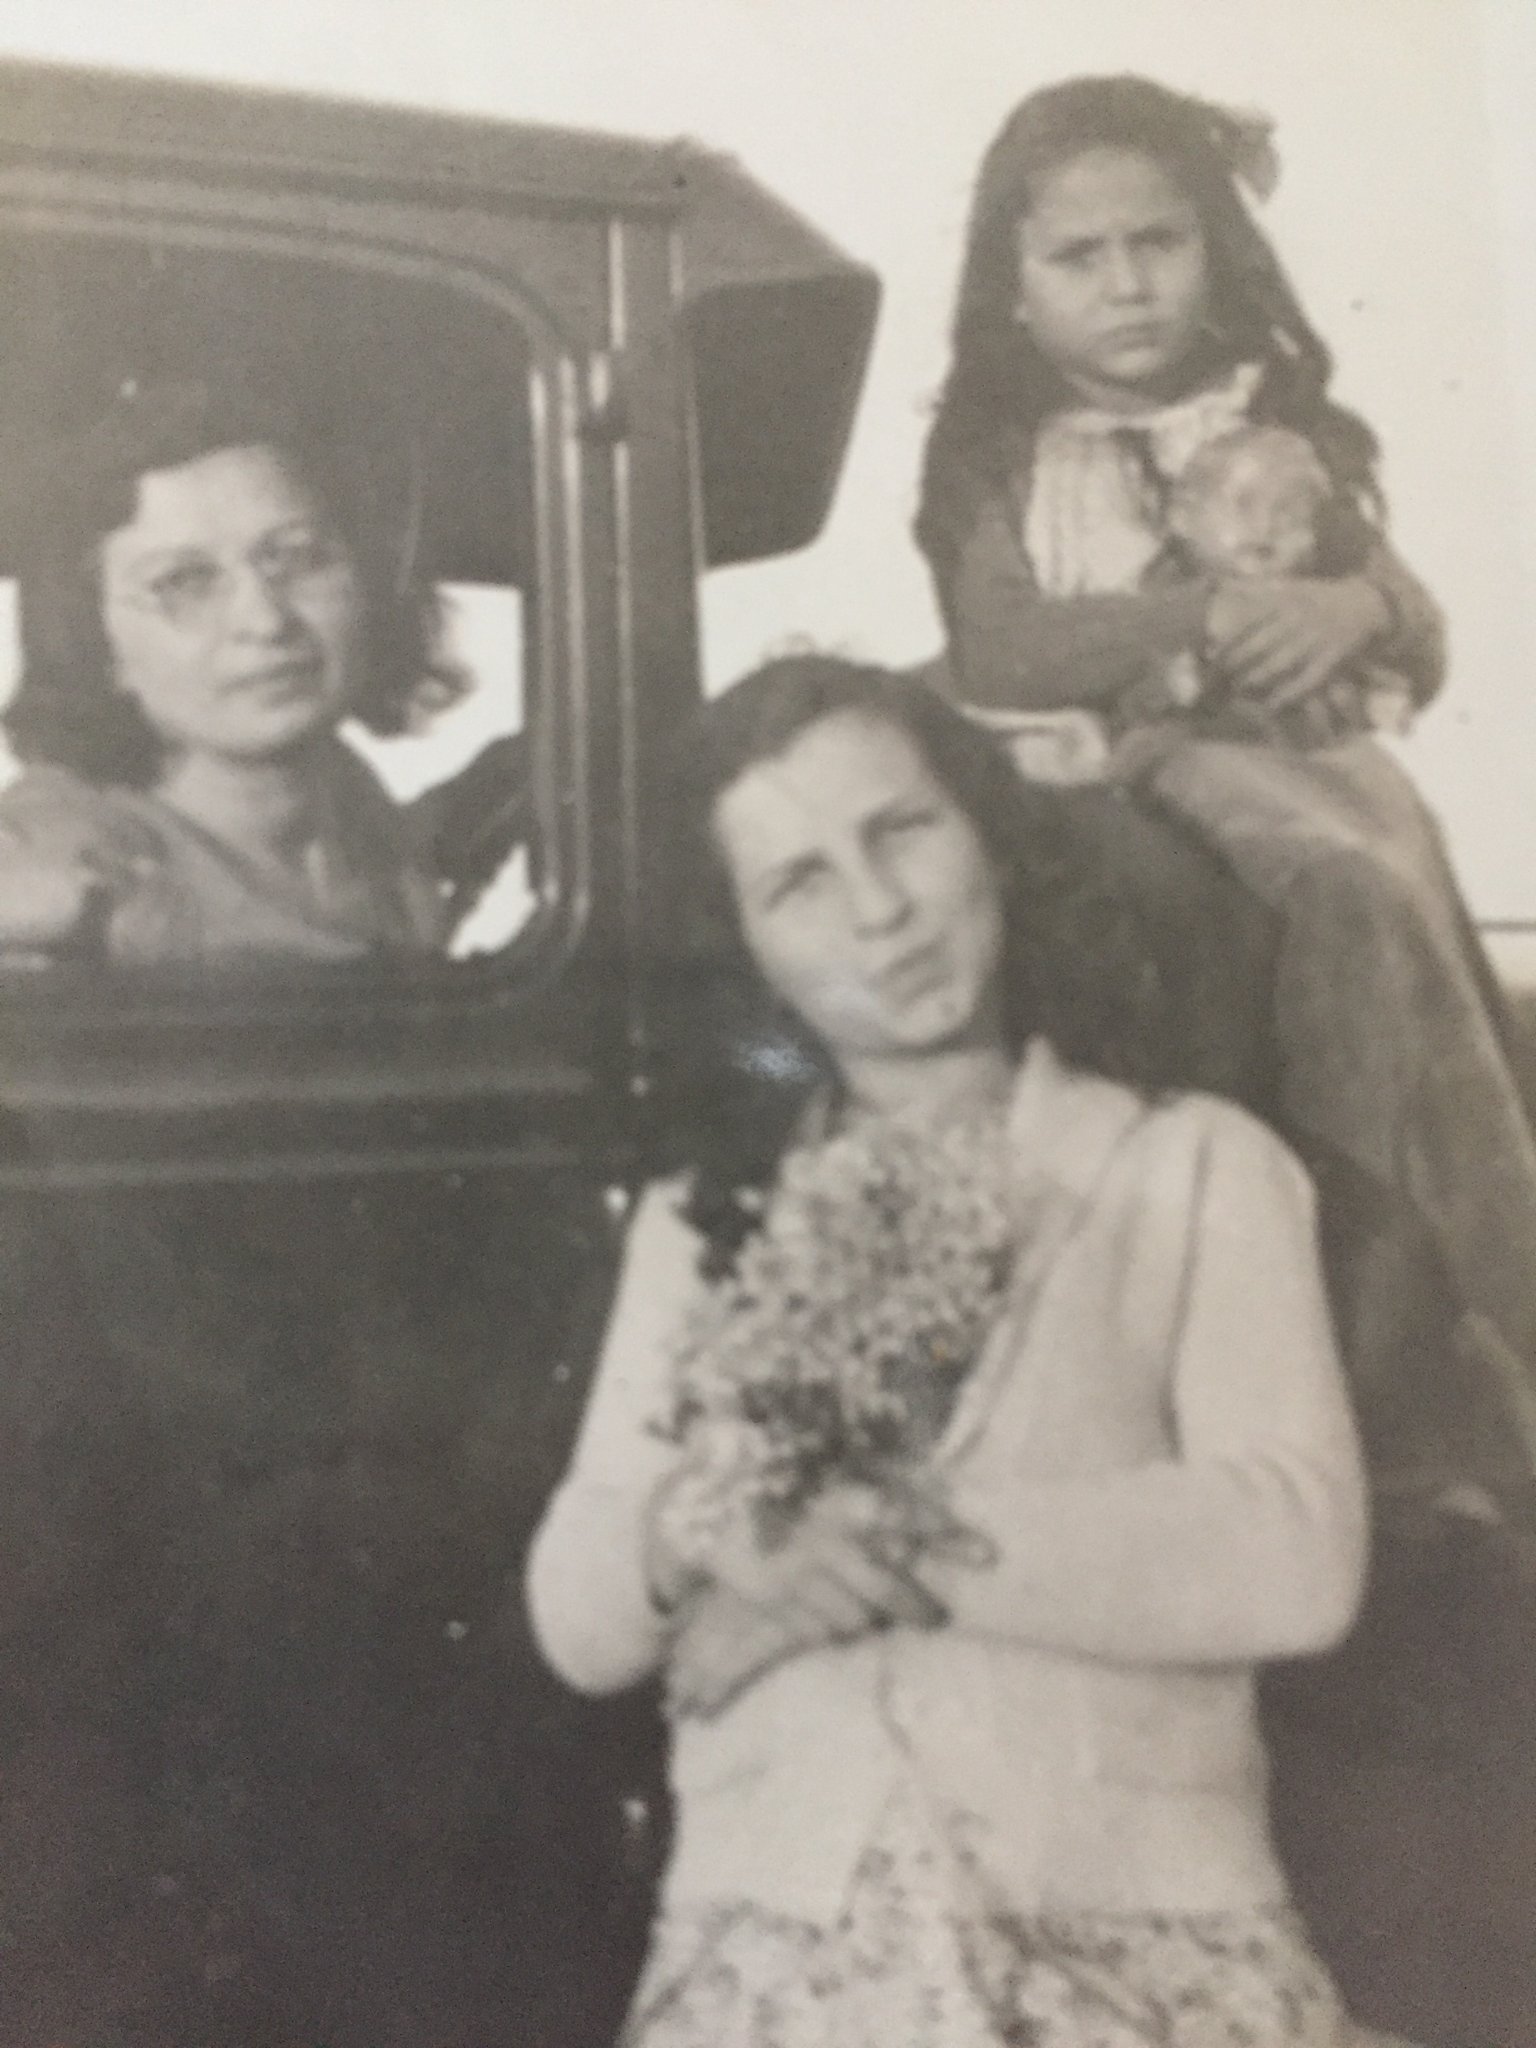 Kipp Dawson's mother sits on the hood of a 1930s car holding a doll. Her mother drives the car and her sister stands in front, holding a bunch of daisies.